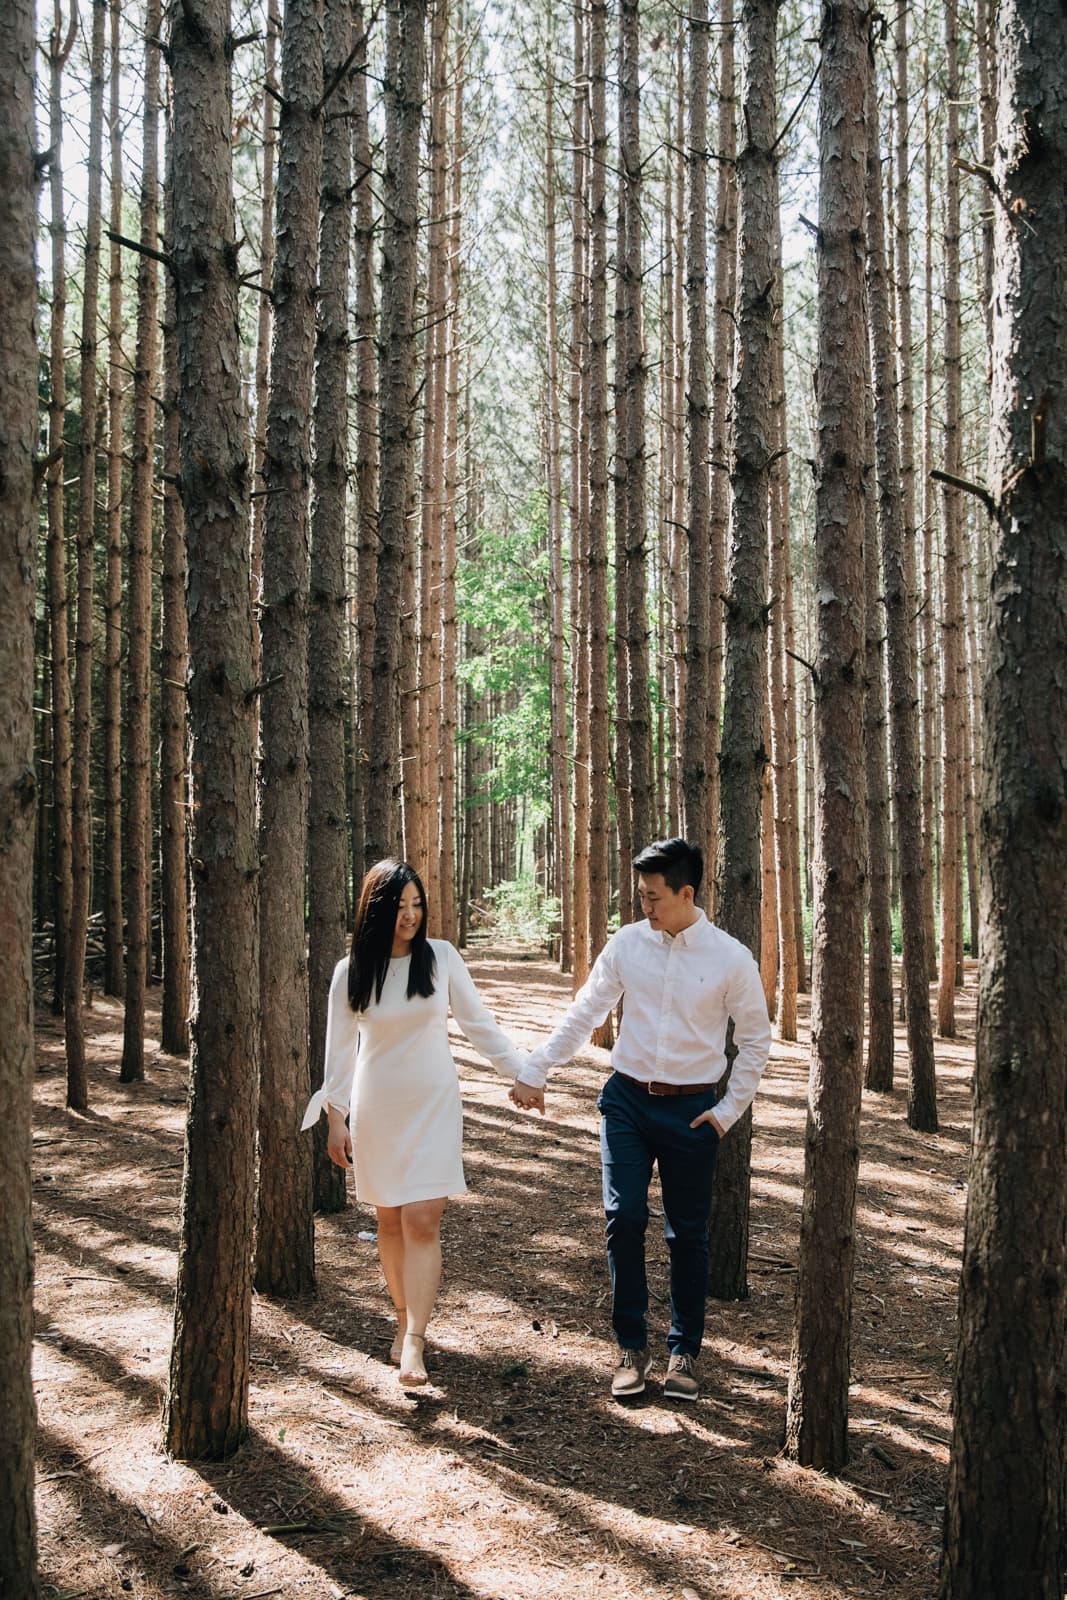 A couple having their engagement session at the Kortright Centre for Conservation in Woodbridge, walking through a pine forest.